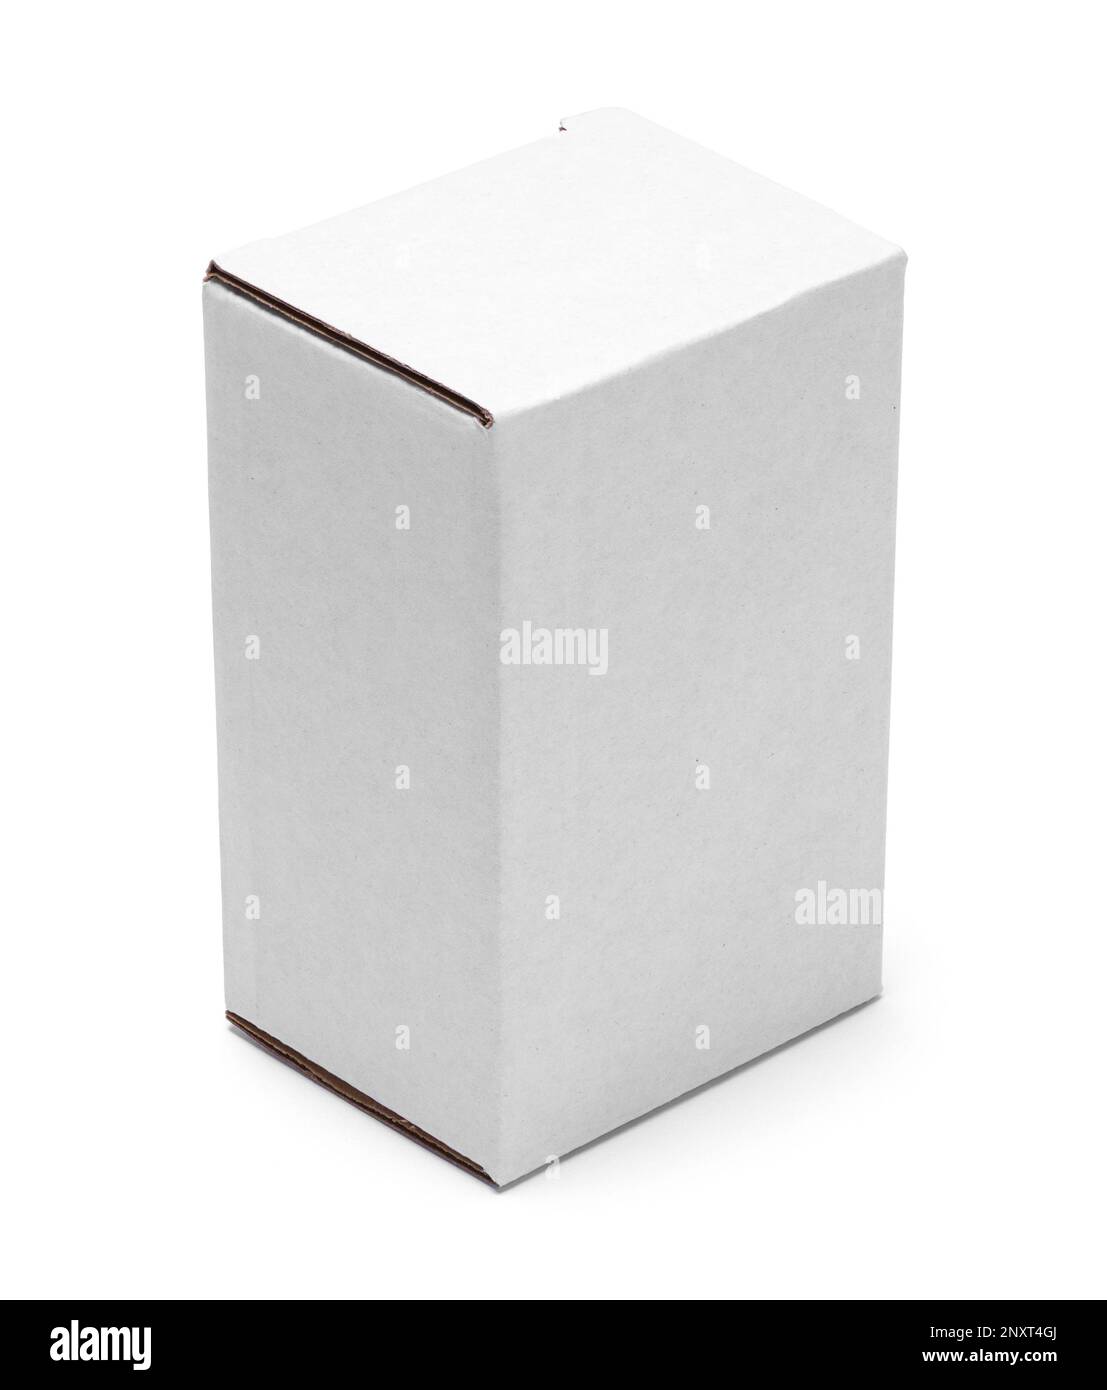 Upright Rectangle Box Cut Out on White. Stock Photo